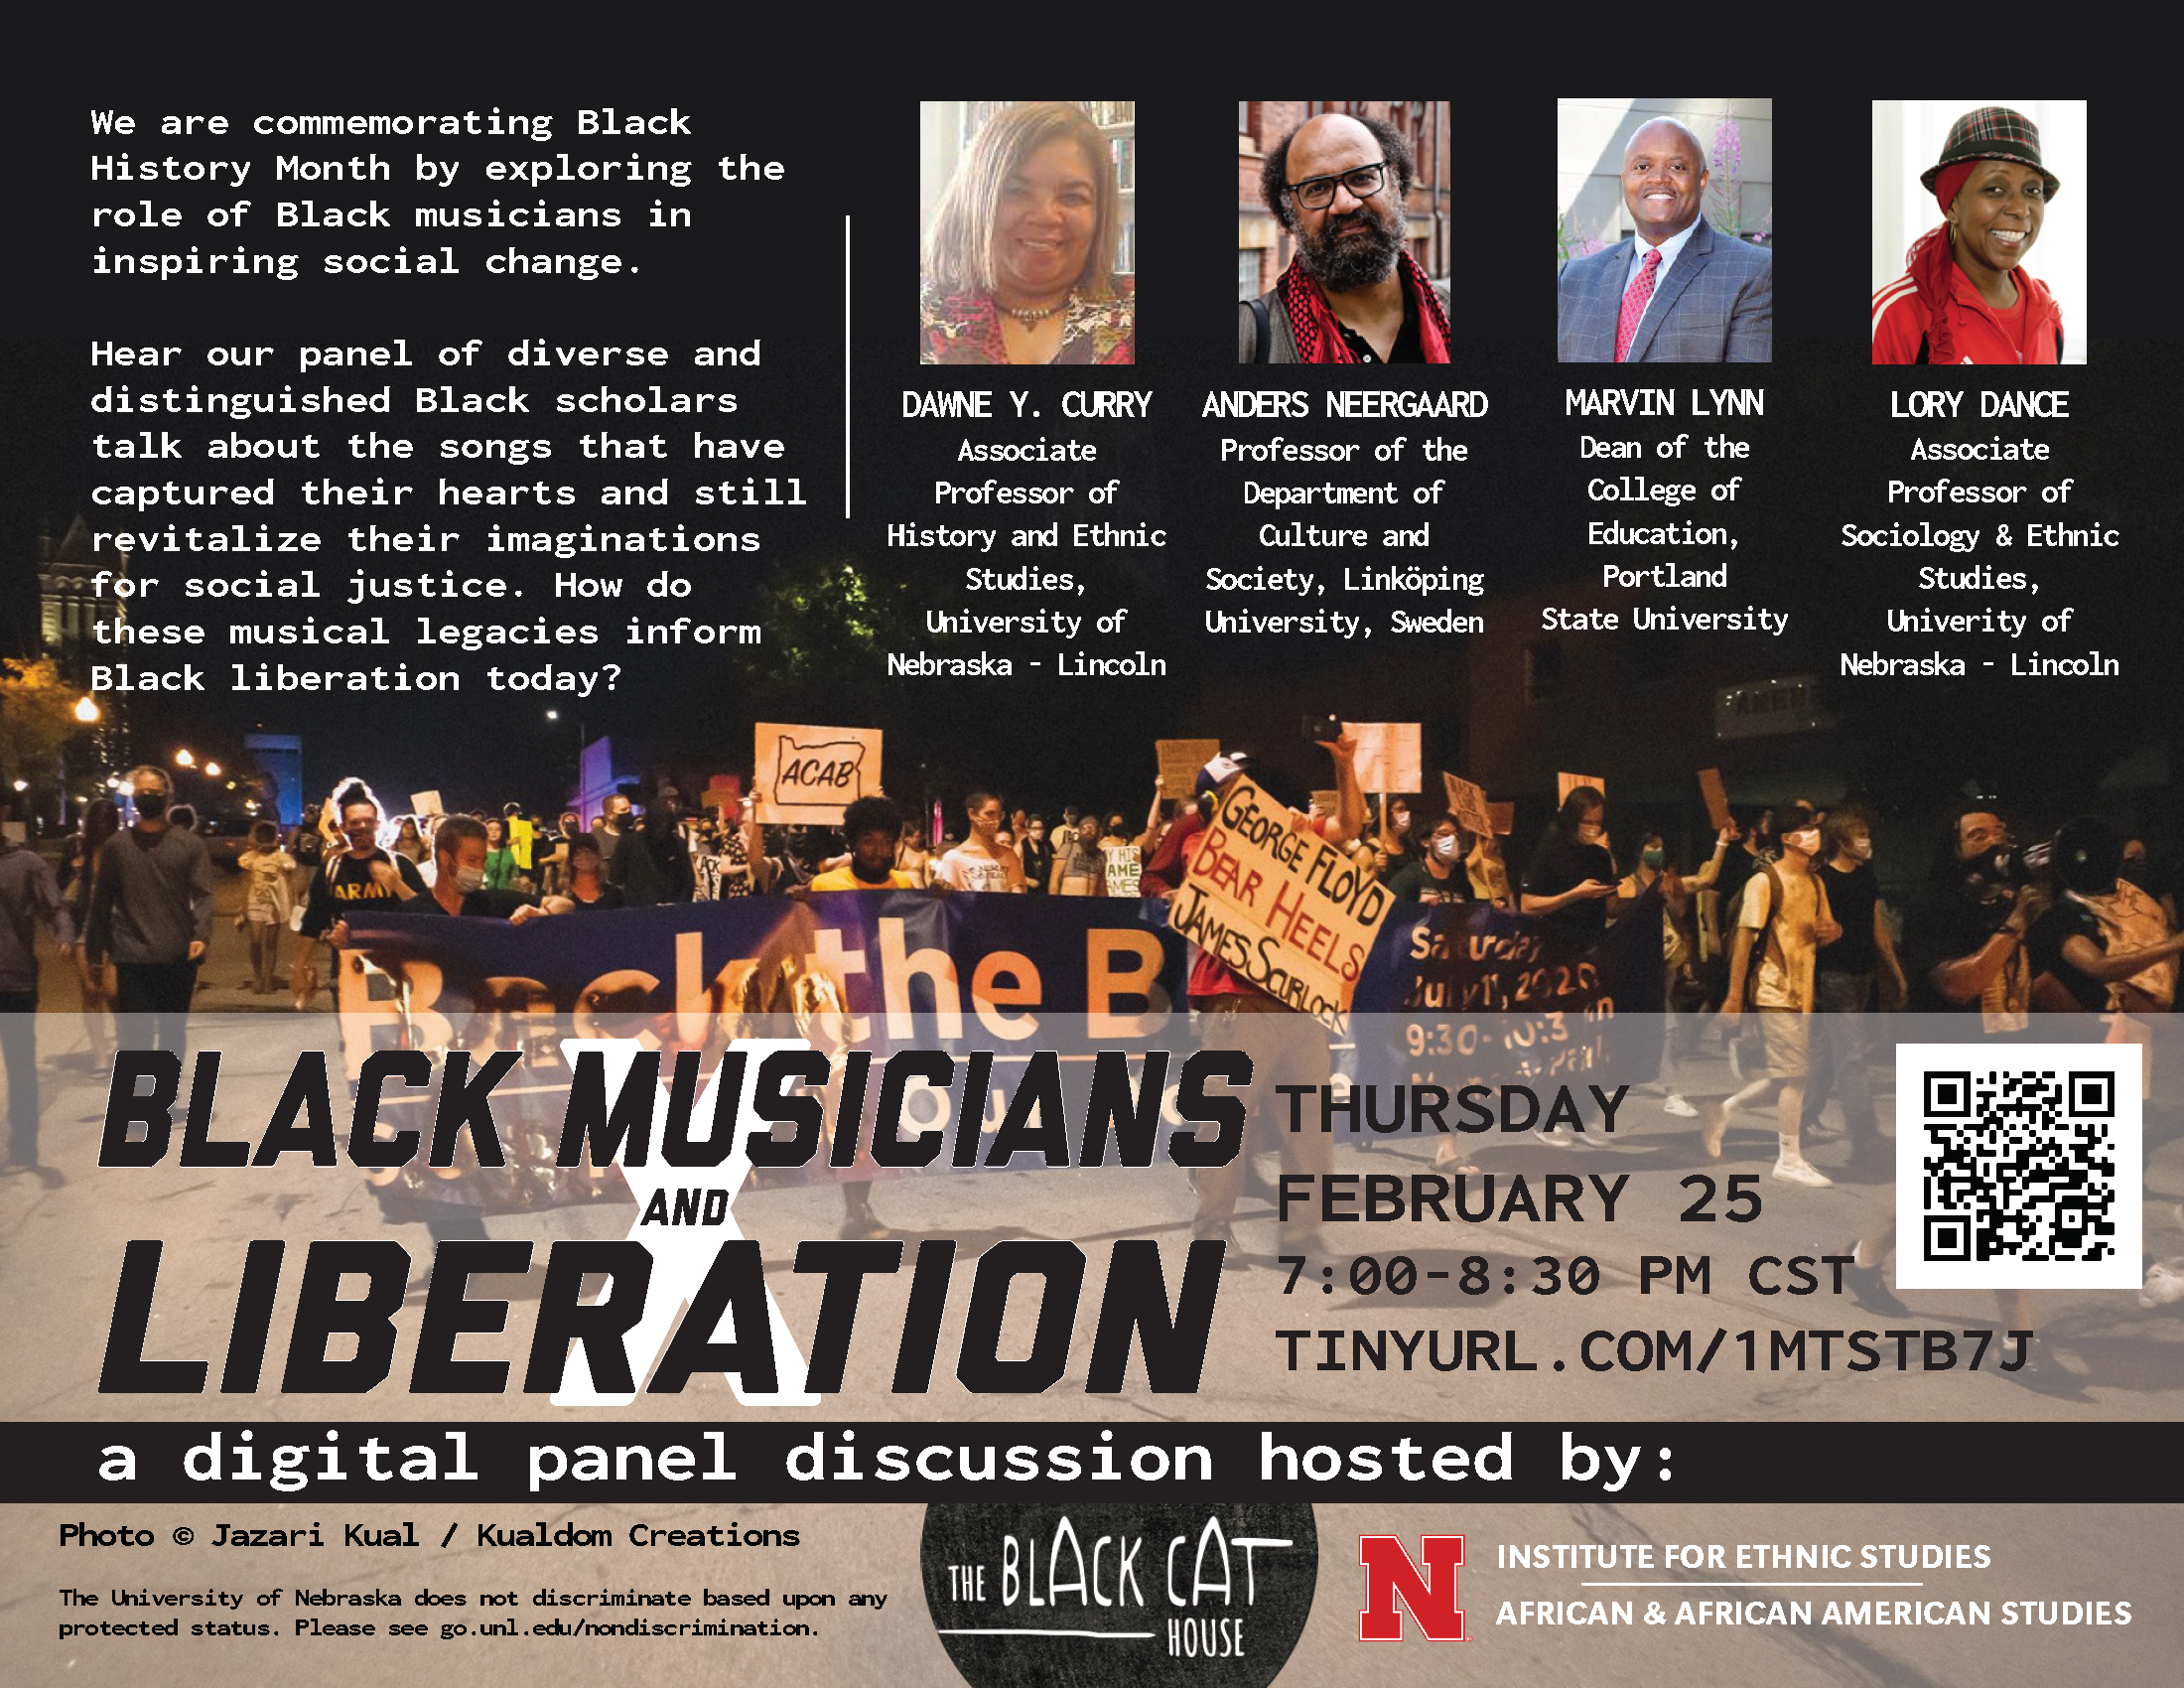 Black Musicians and Liberation